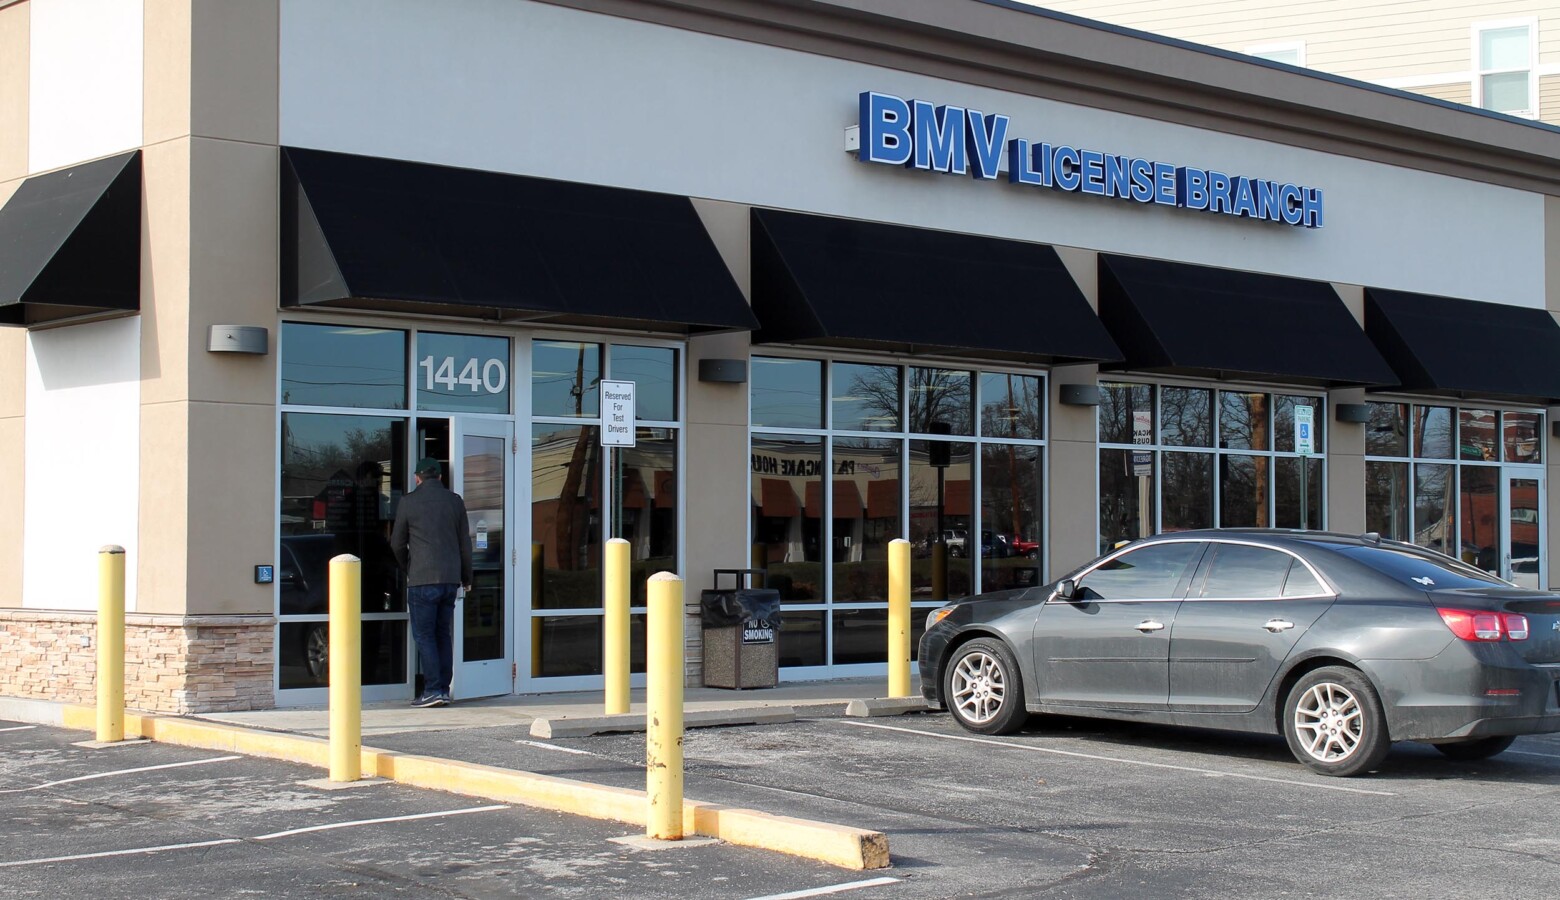 The BMV first reopened to in-person business in May. But it was restricted to appointment only. (Lauren Chapman/IPB News)